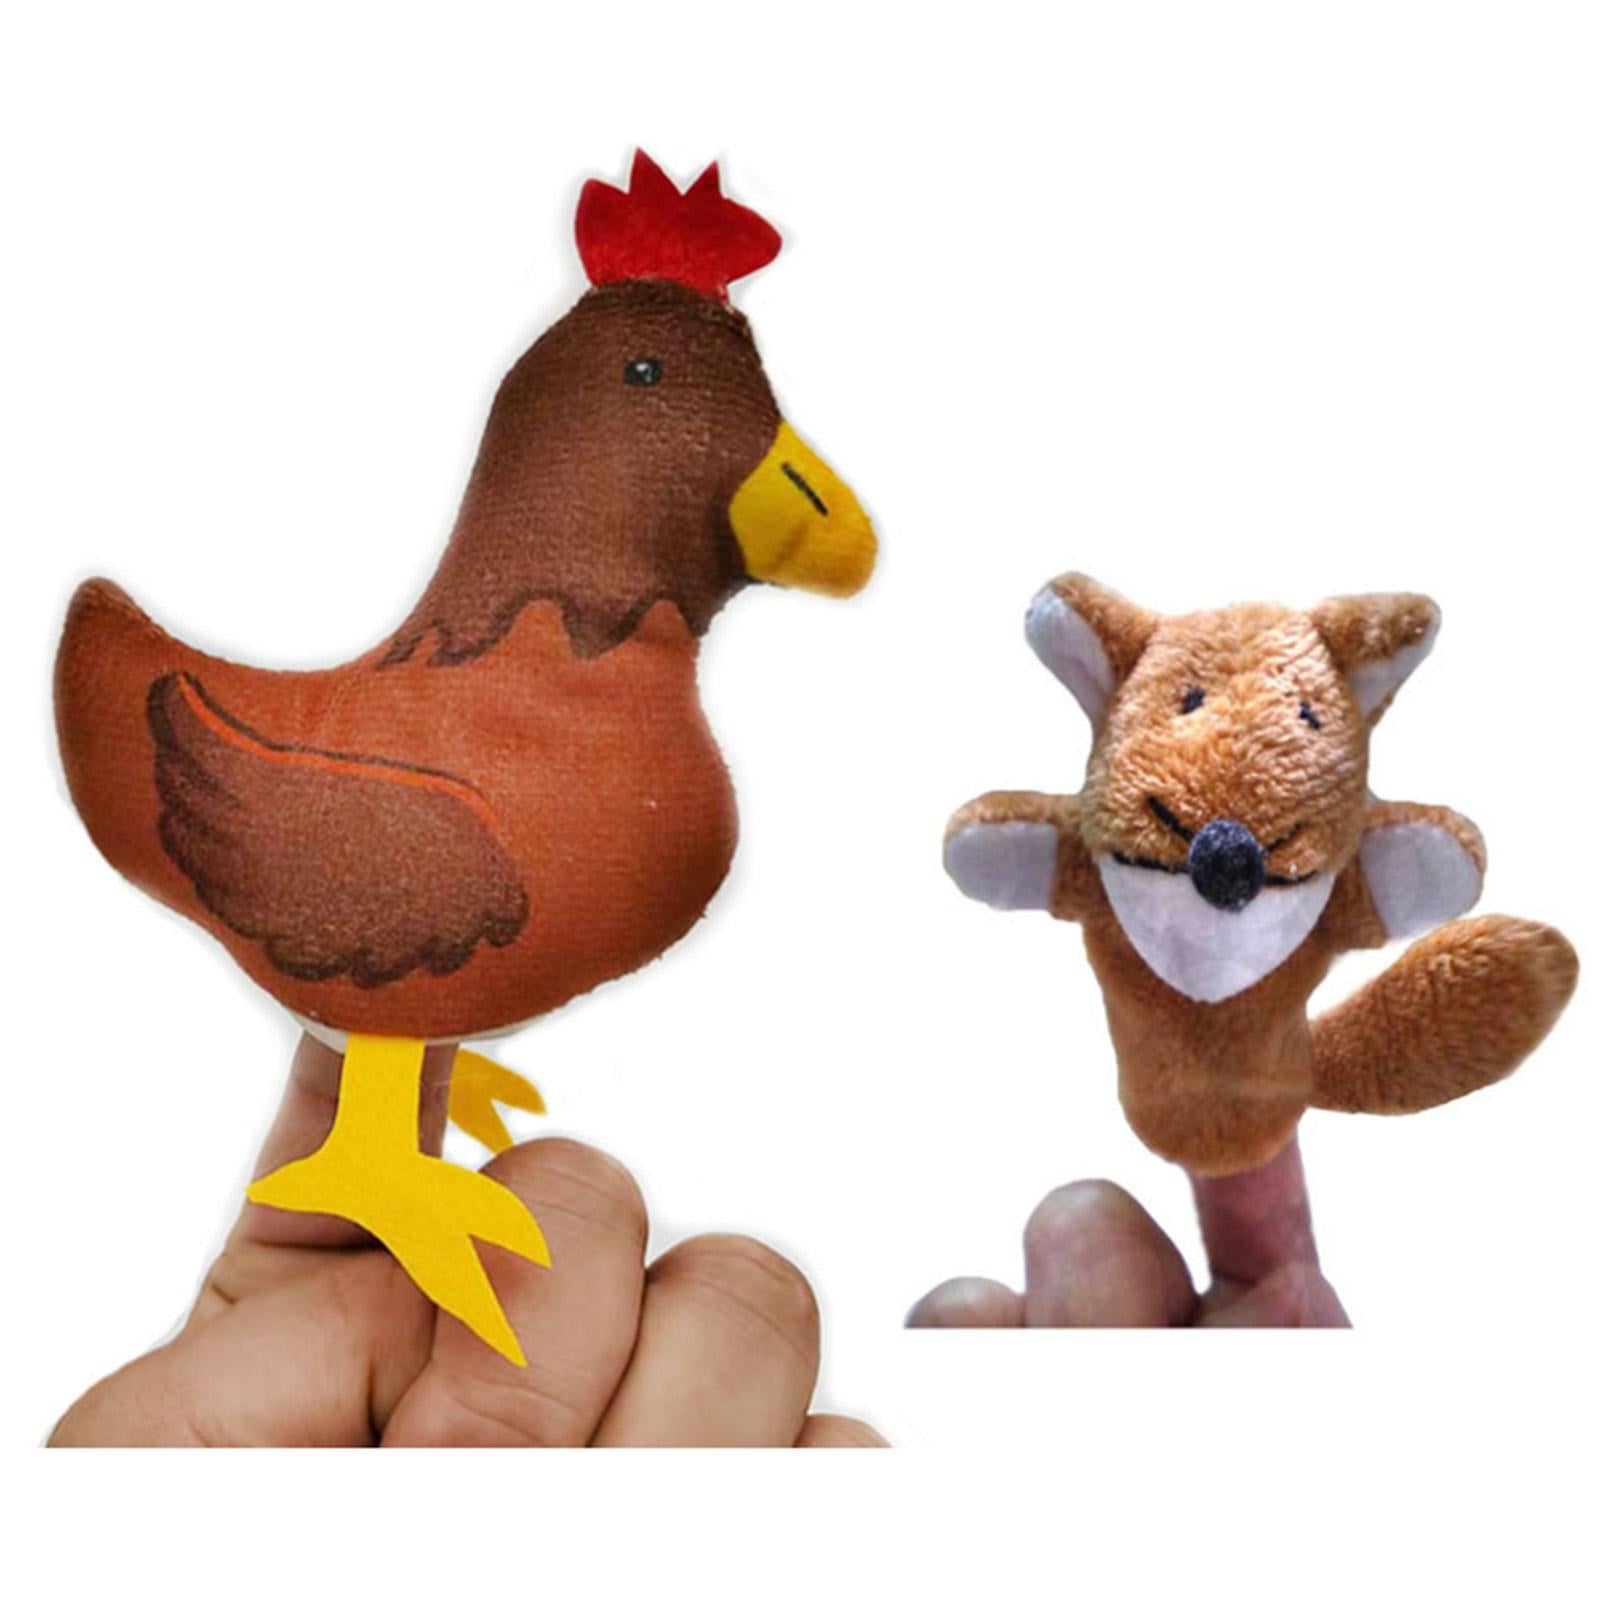 2 Pieces Different Cartoon Animal Finger Puppets Soft Dolls Props Toys(Lowrie & Hen)